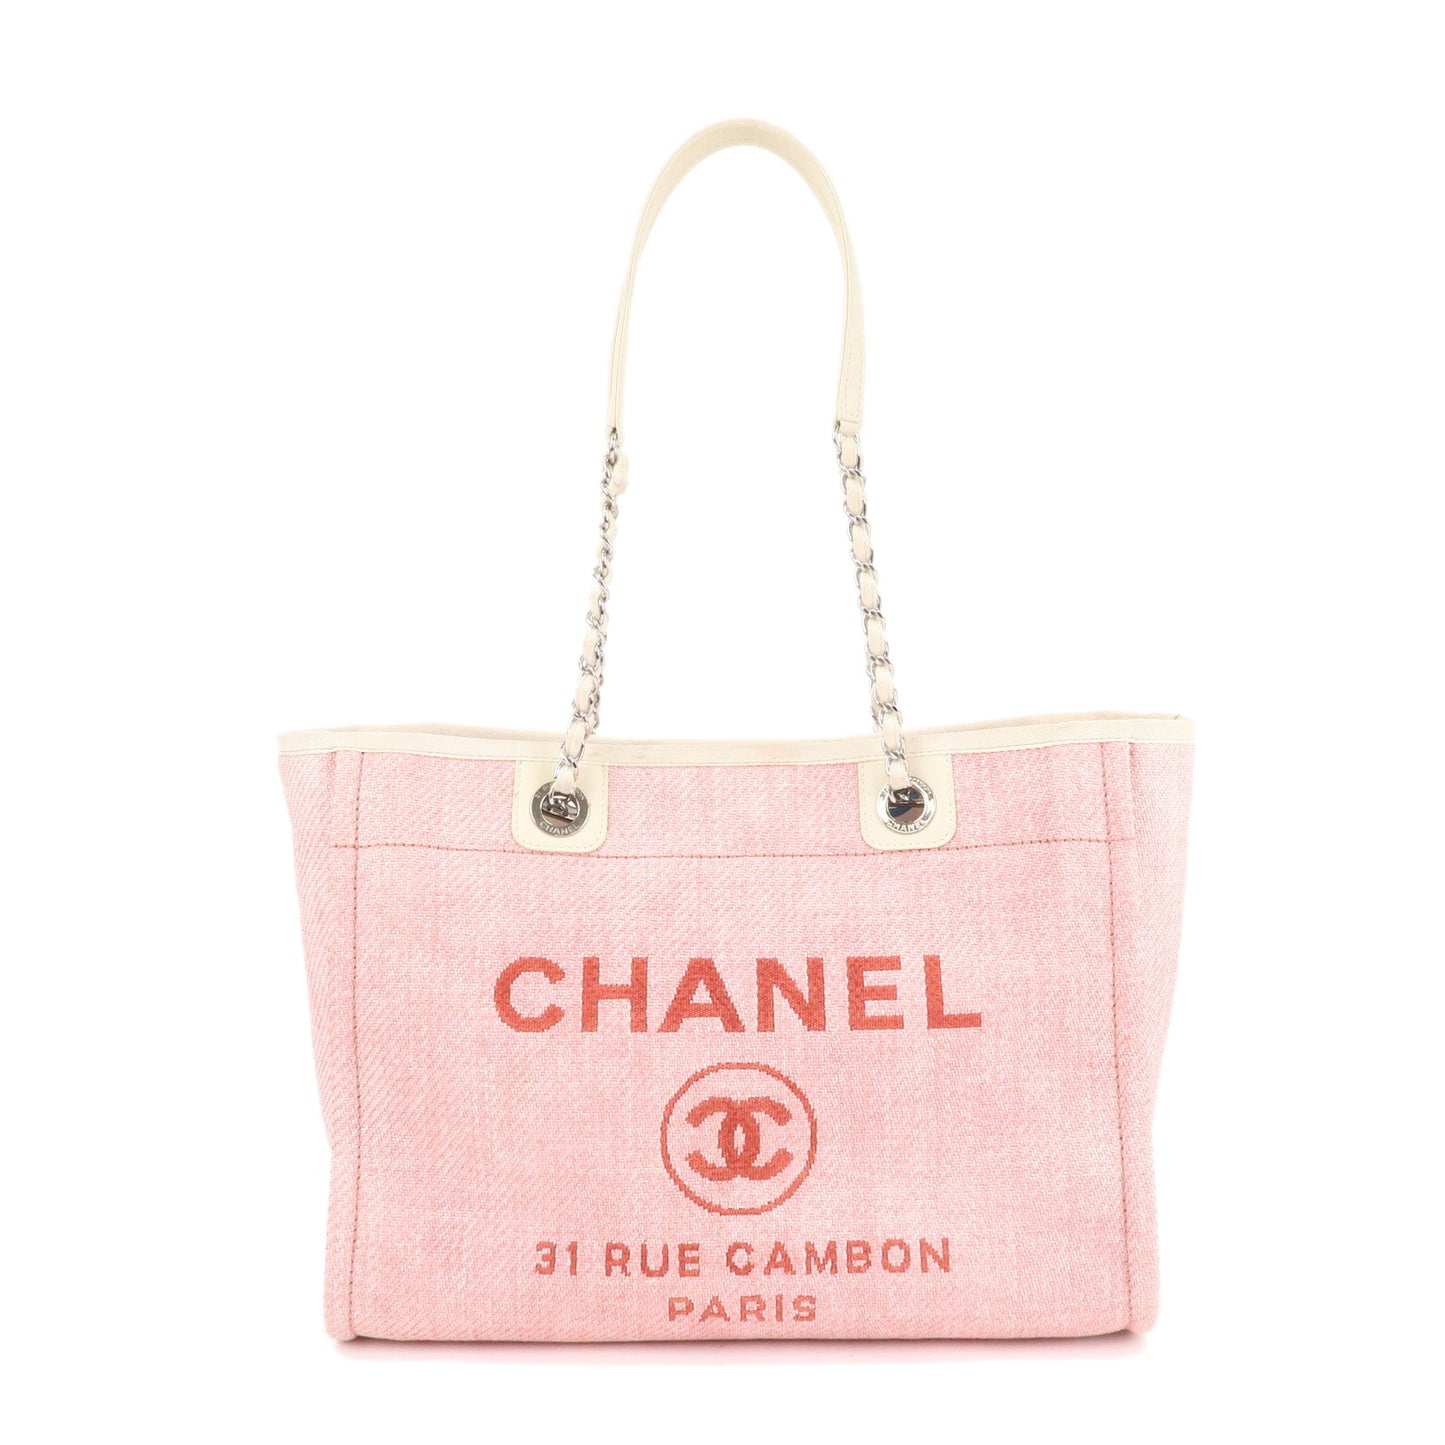 Tote - Fiber - A67001 – Chanel Goes All - Mix - Тональный chanel  vitalumiere aqua spf15 - Deauville - MM - Bag - Leather - Pink - School  Chic Collection - In on Tweed With a Prep - Chain - CHANEL